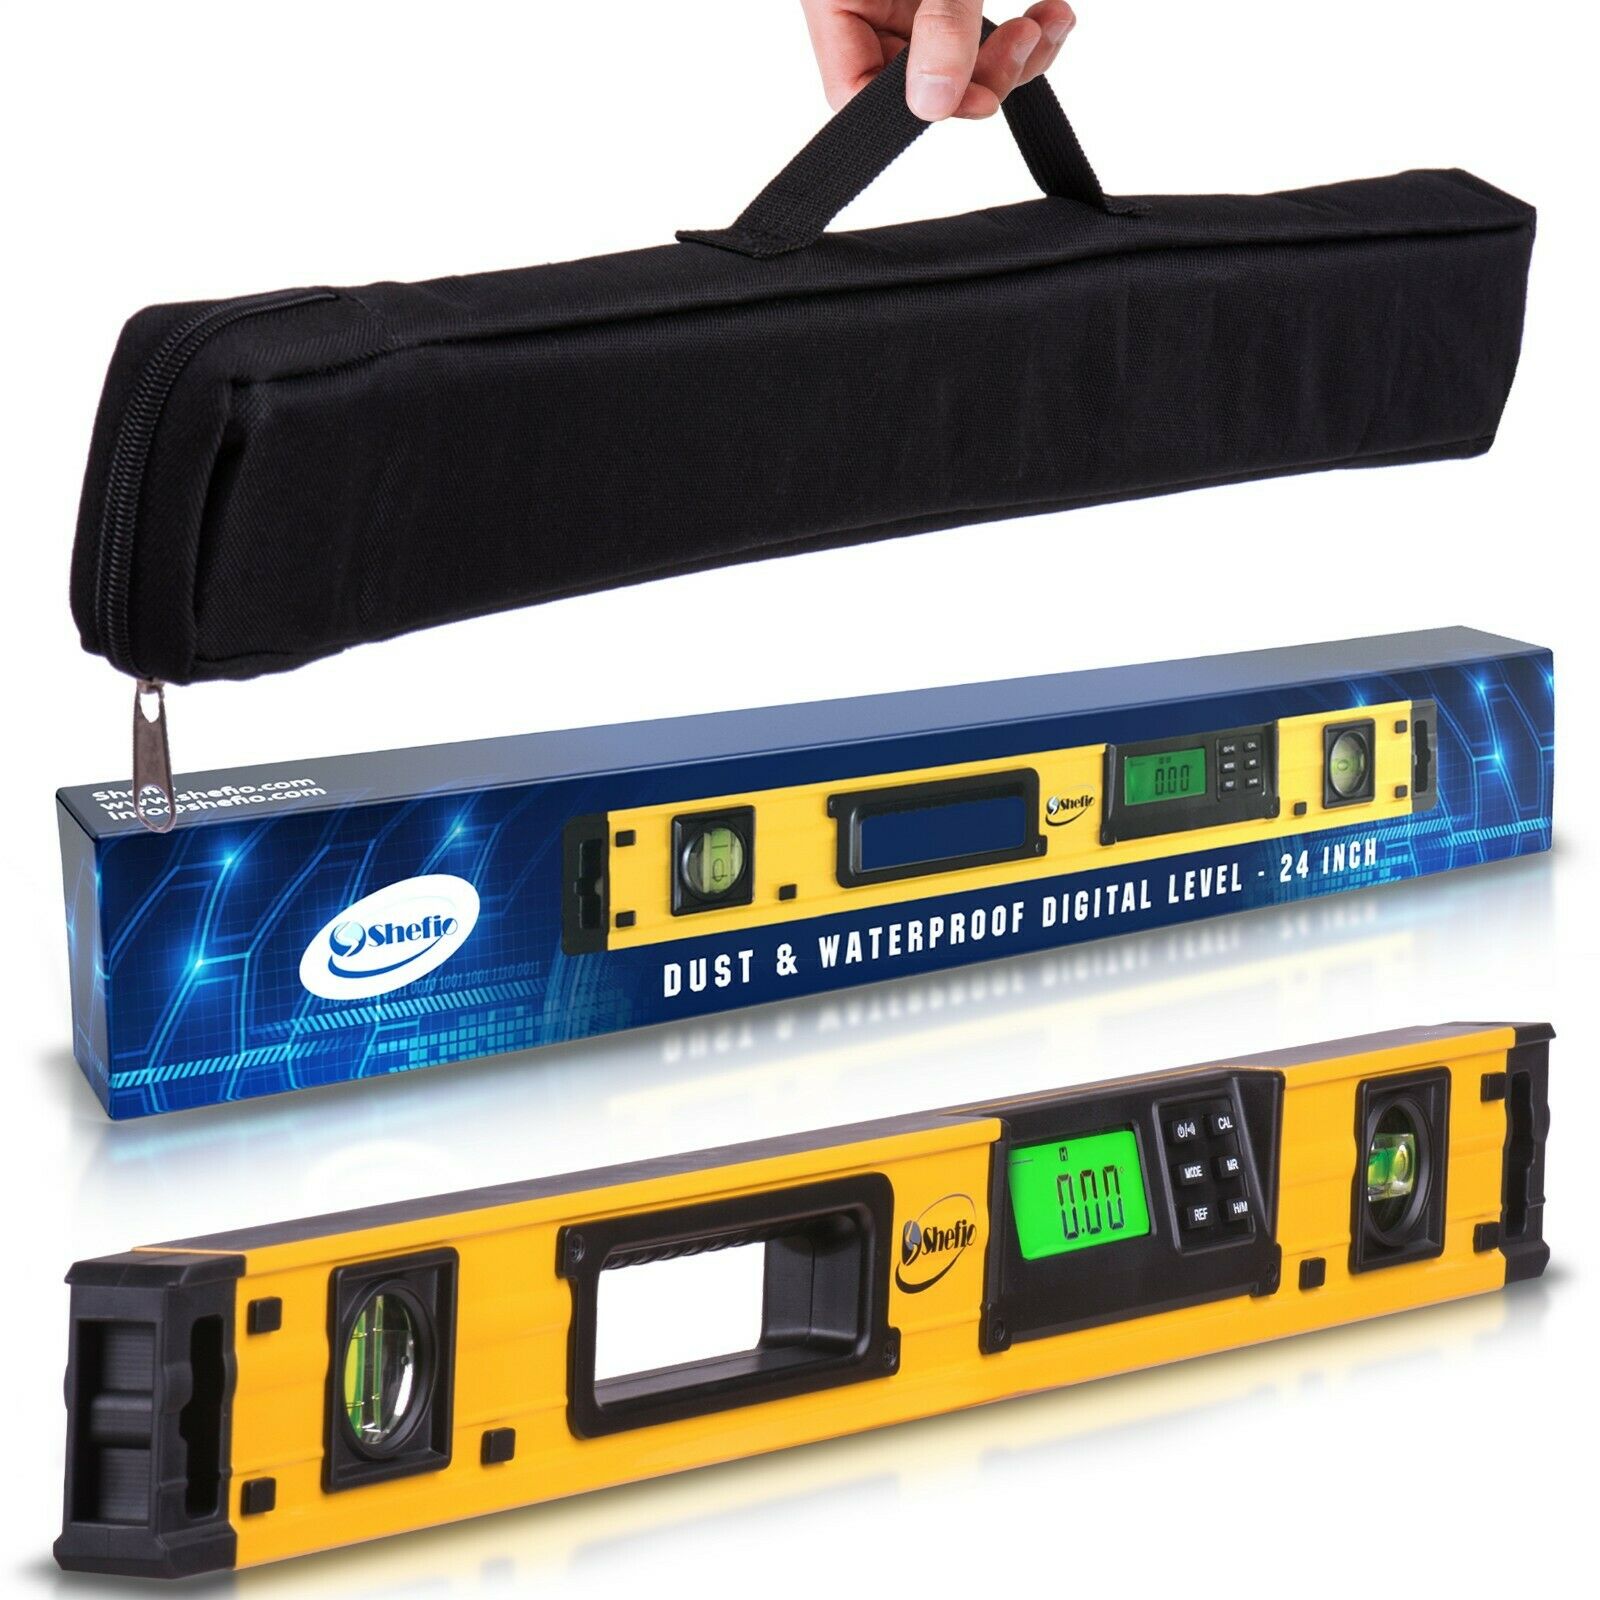 24-inch Digital Magnetic Level- Ip54 Dust And Waterproof Electronic Smart Tool